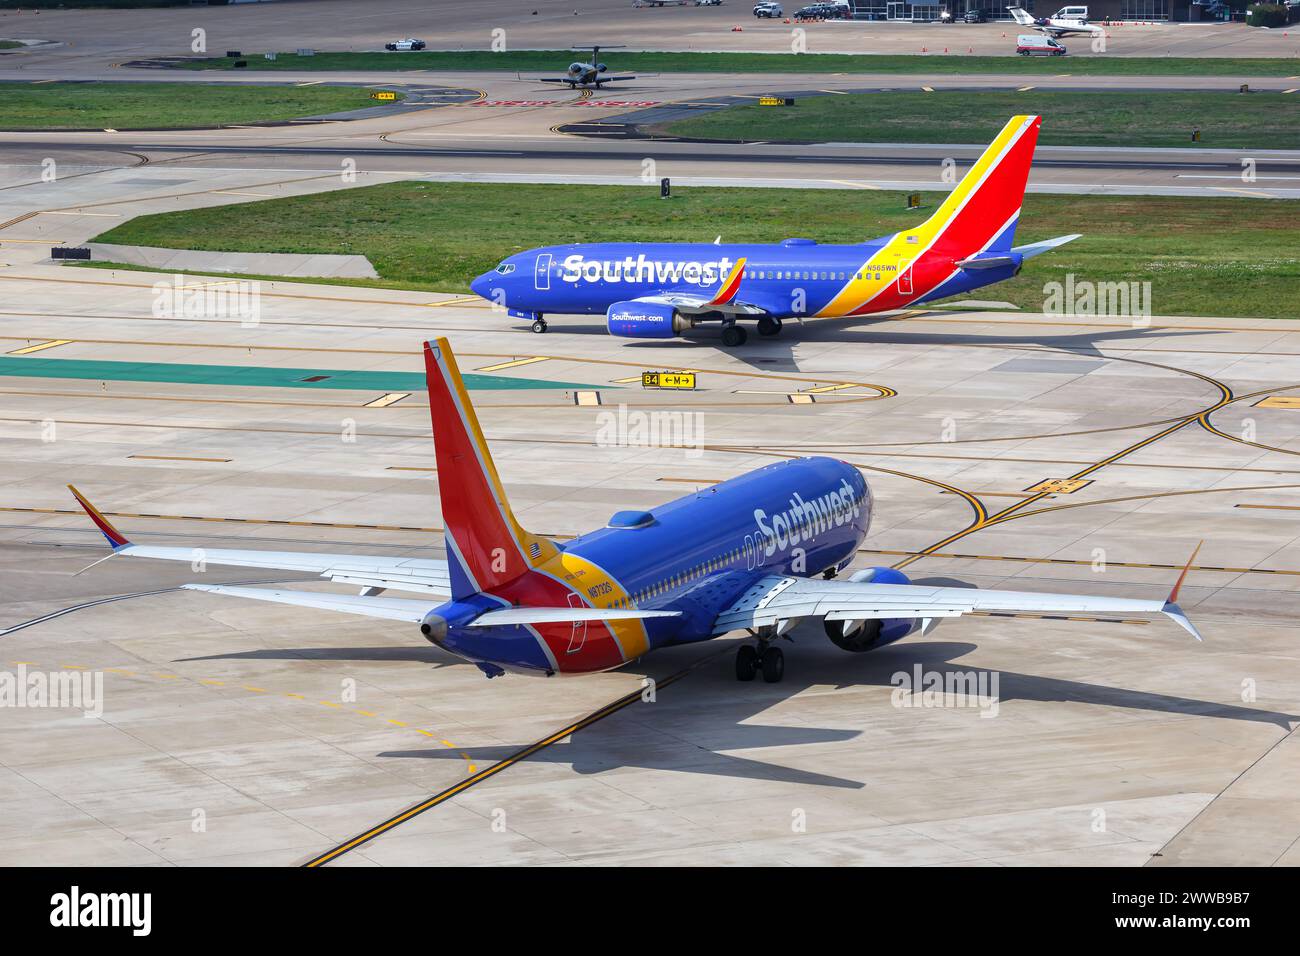 Dallas, United States - November 7, 2022: Southwest Boeing airplanes at Dallas Love Field Airport (DAL) in the United States. Stock Photo